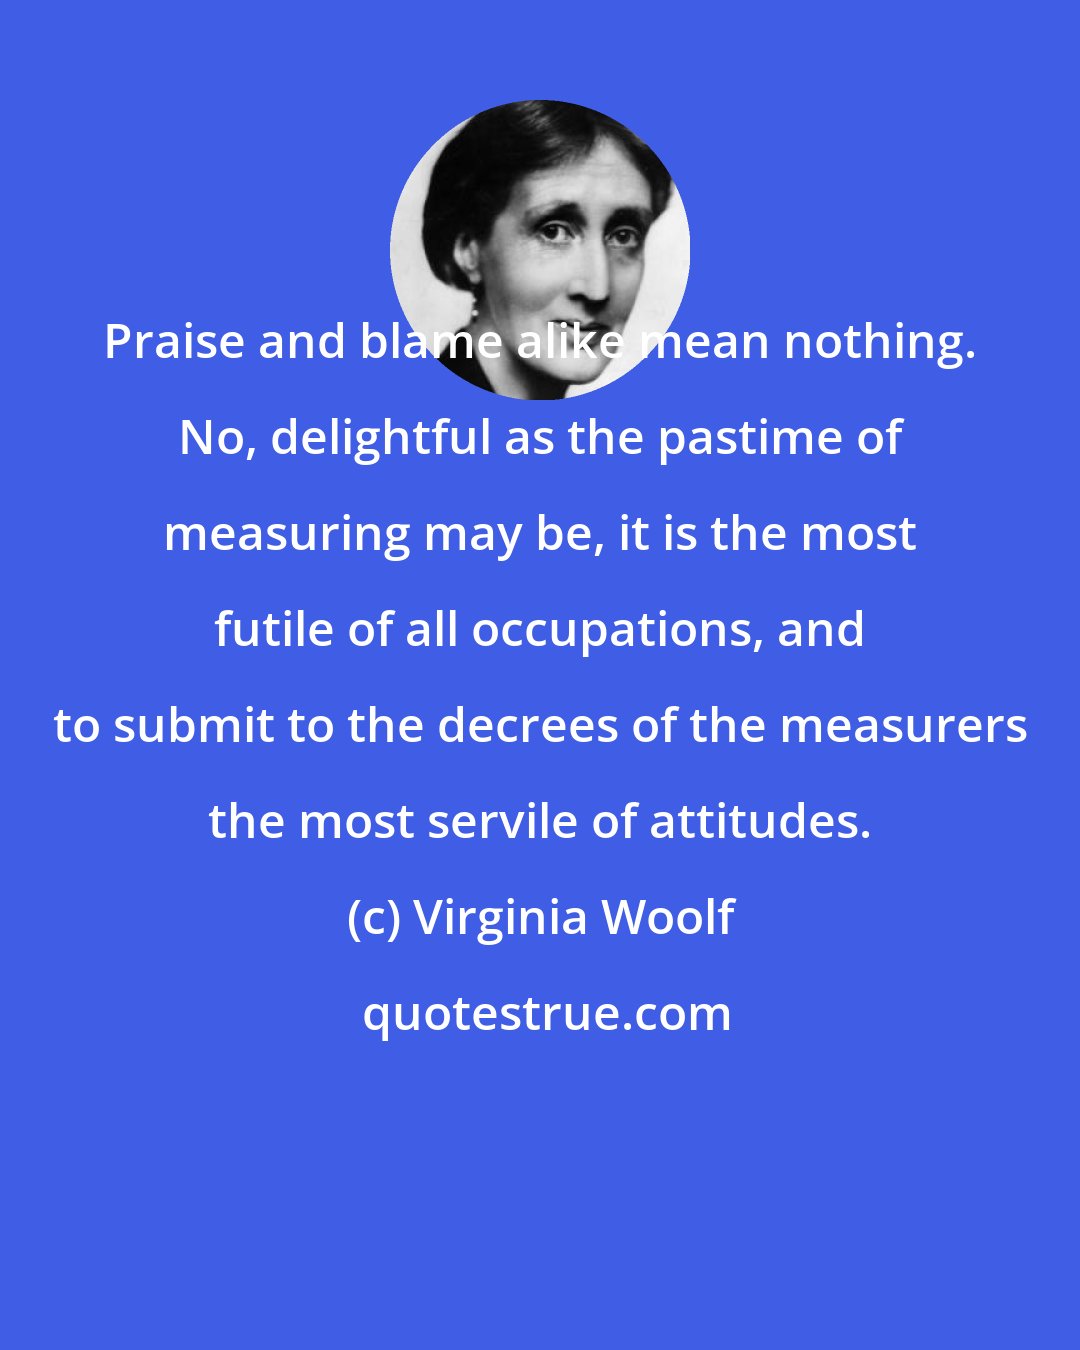 Virginia Woolf: Praise and blame alike mean nothing. No, delightful as the pastime of measuring may be, it is the most futile of all occupations, and to submit to the decrees of the measurers the most servile of attitudes.